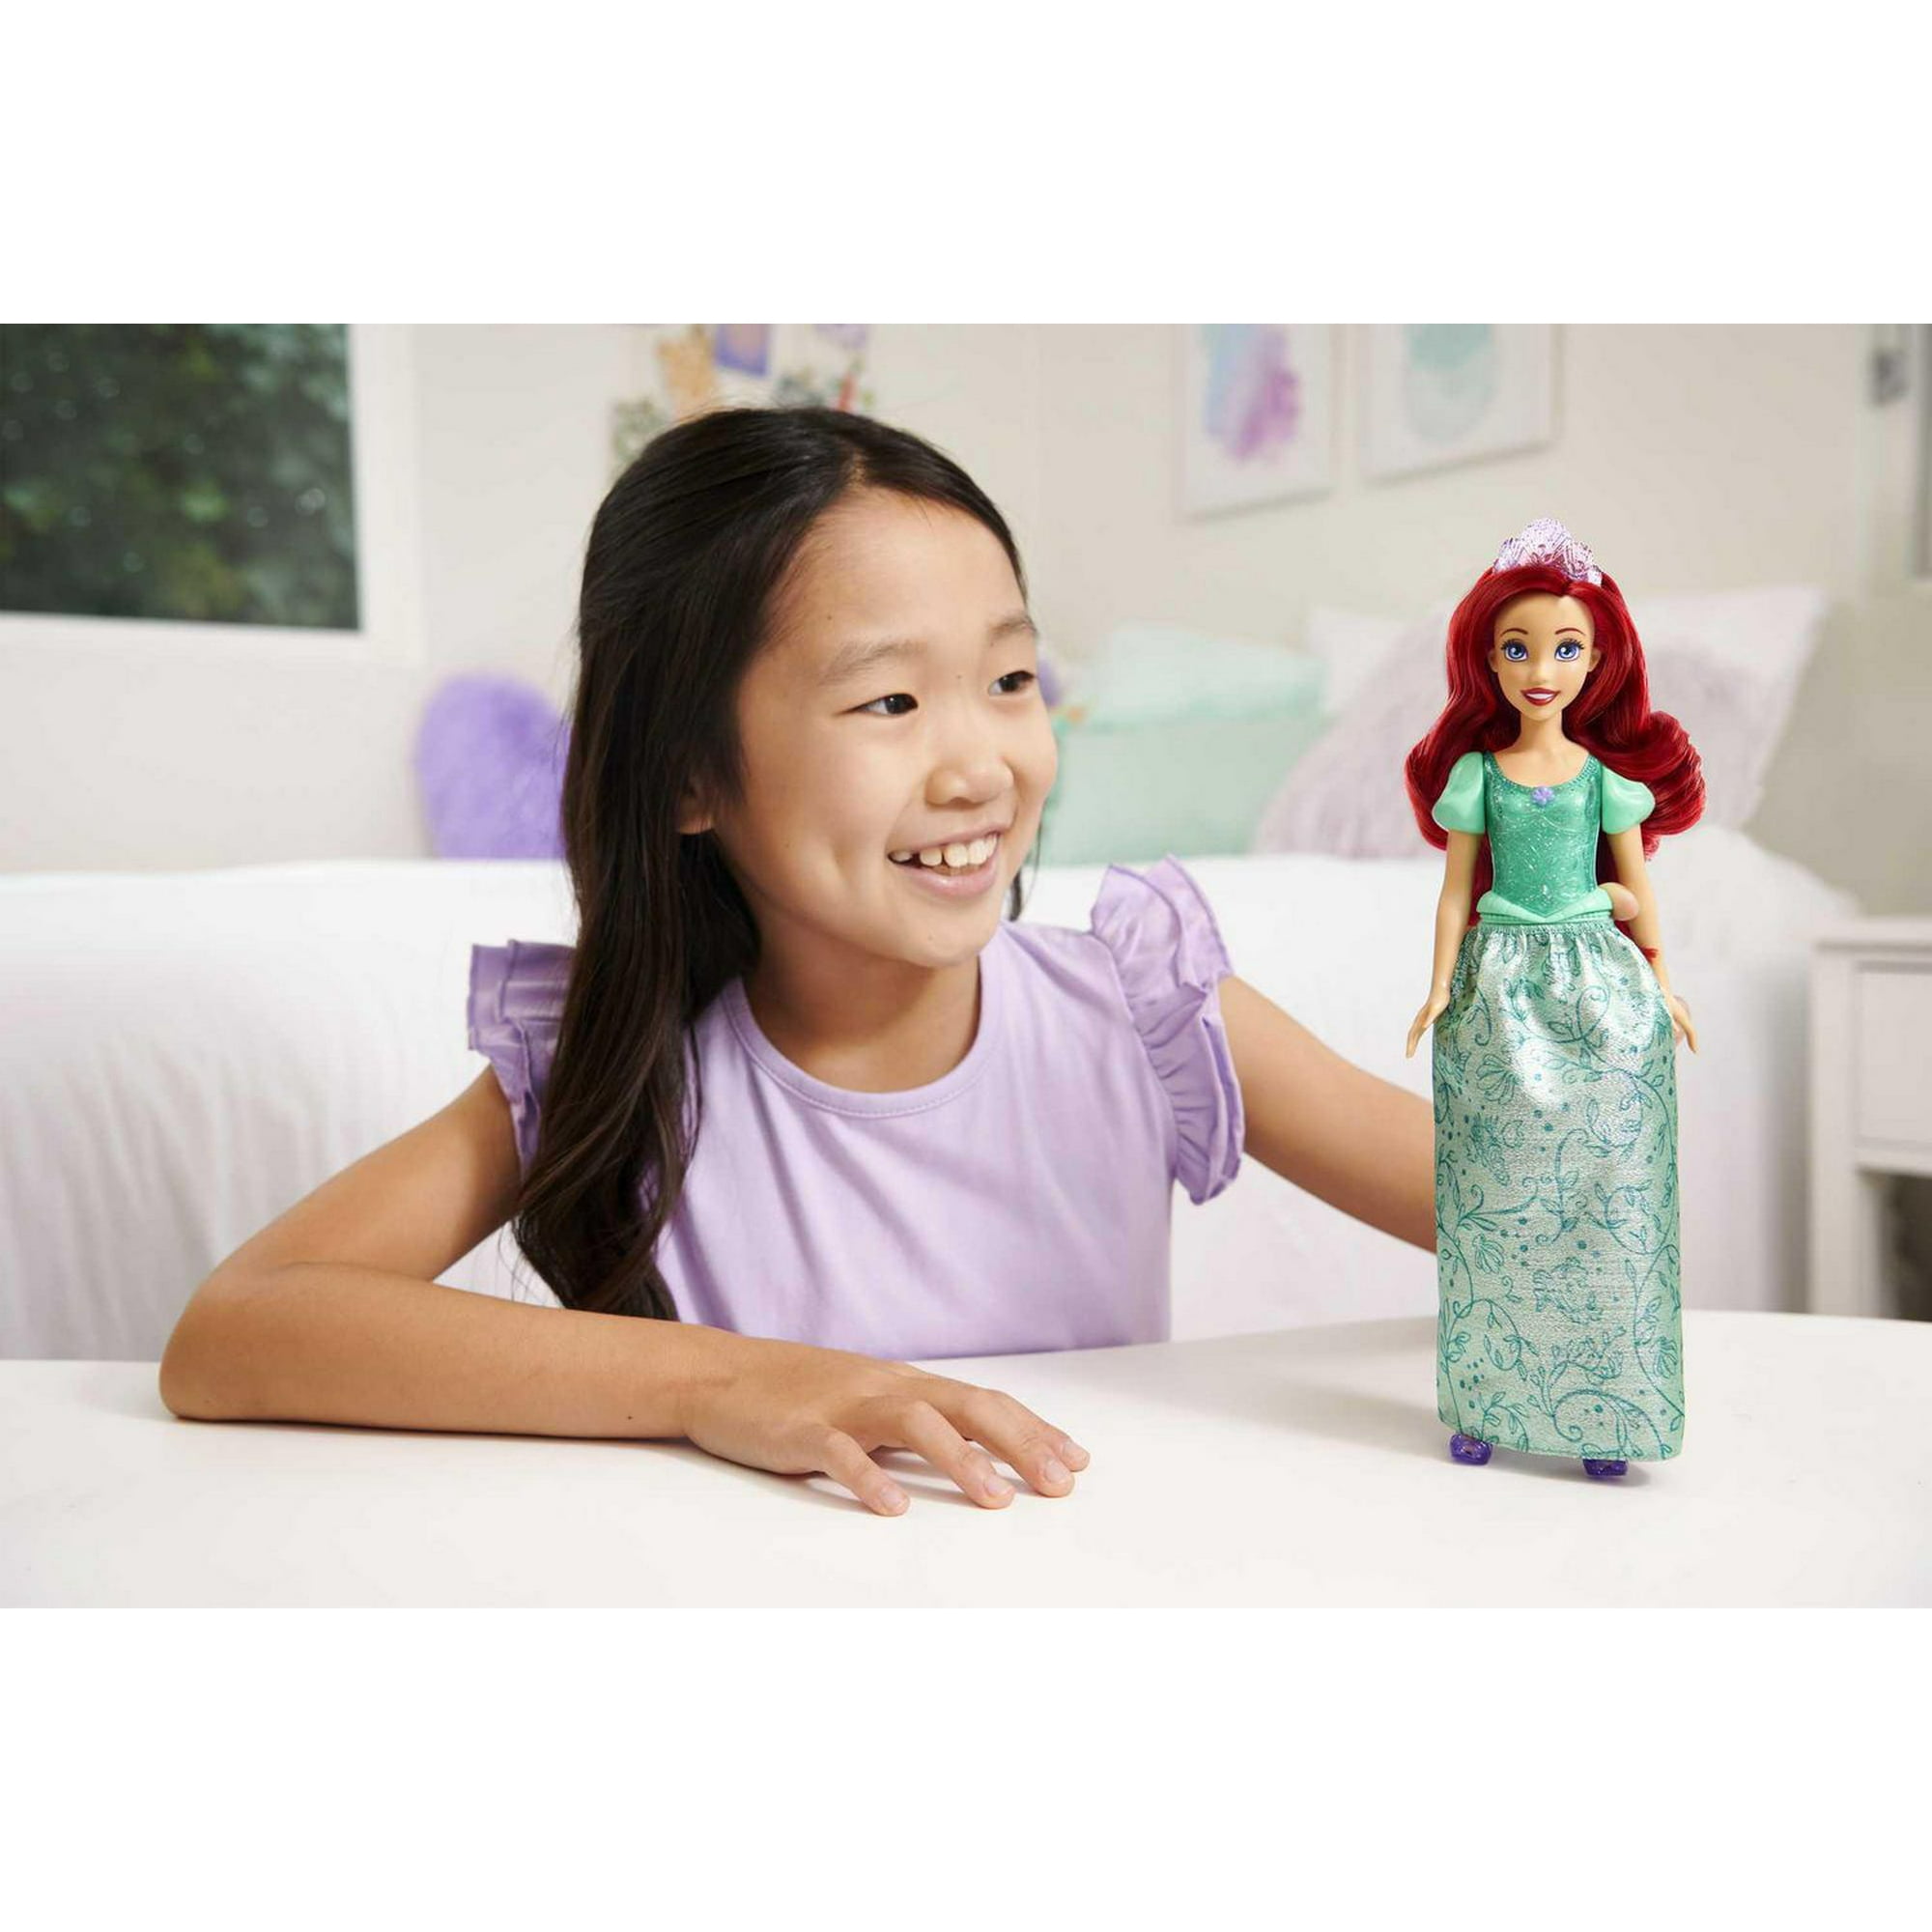 Disney Collection Disney The Little Mermaid Shimmer Spa Ariel Styling Head  The Little Mermaid Ariel Toy Playset